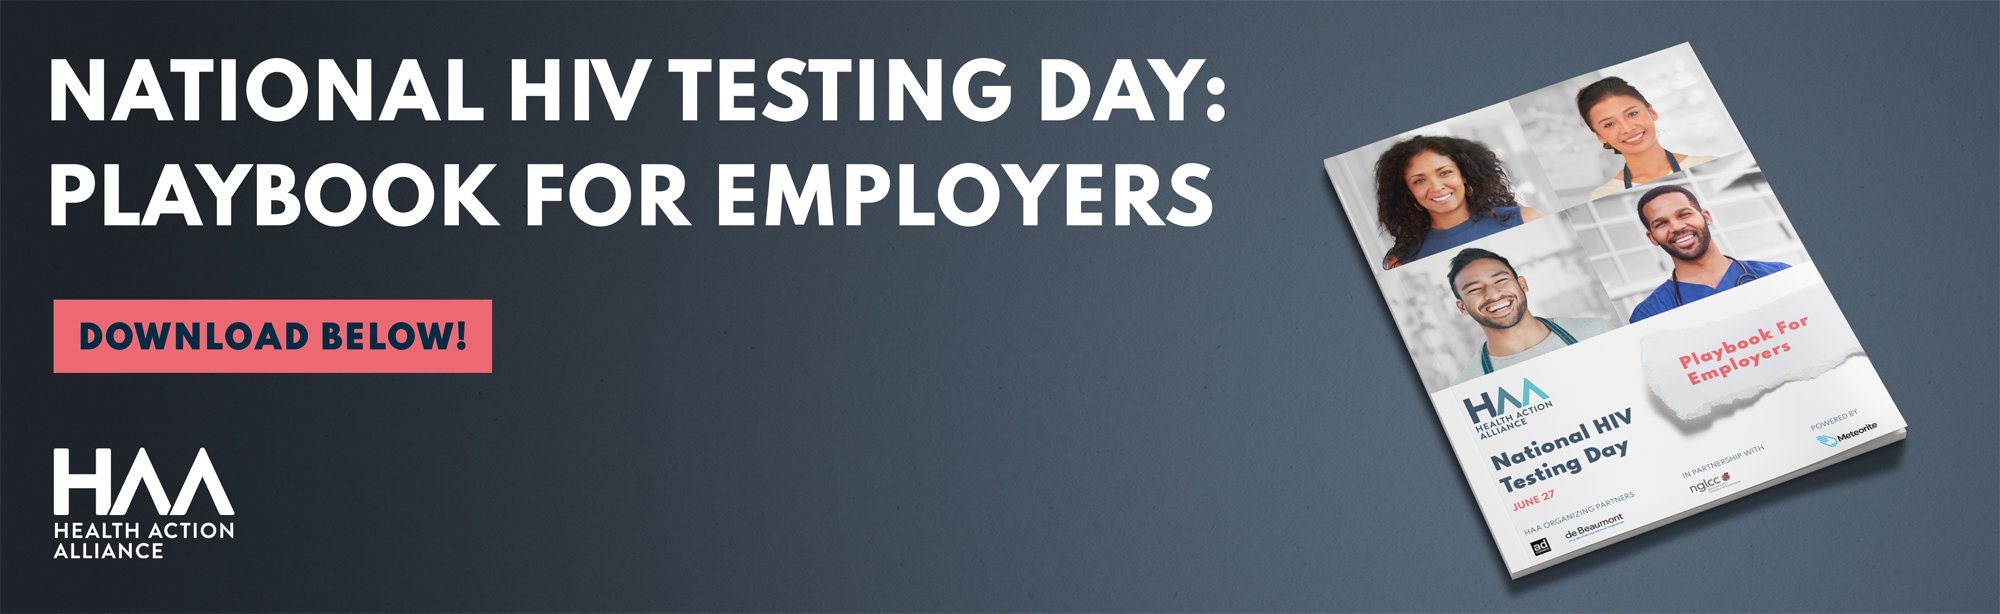 National-HIV-Testing-Day--Playbook-For-Employers-Banner